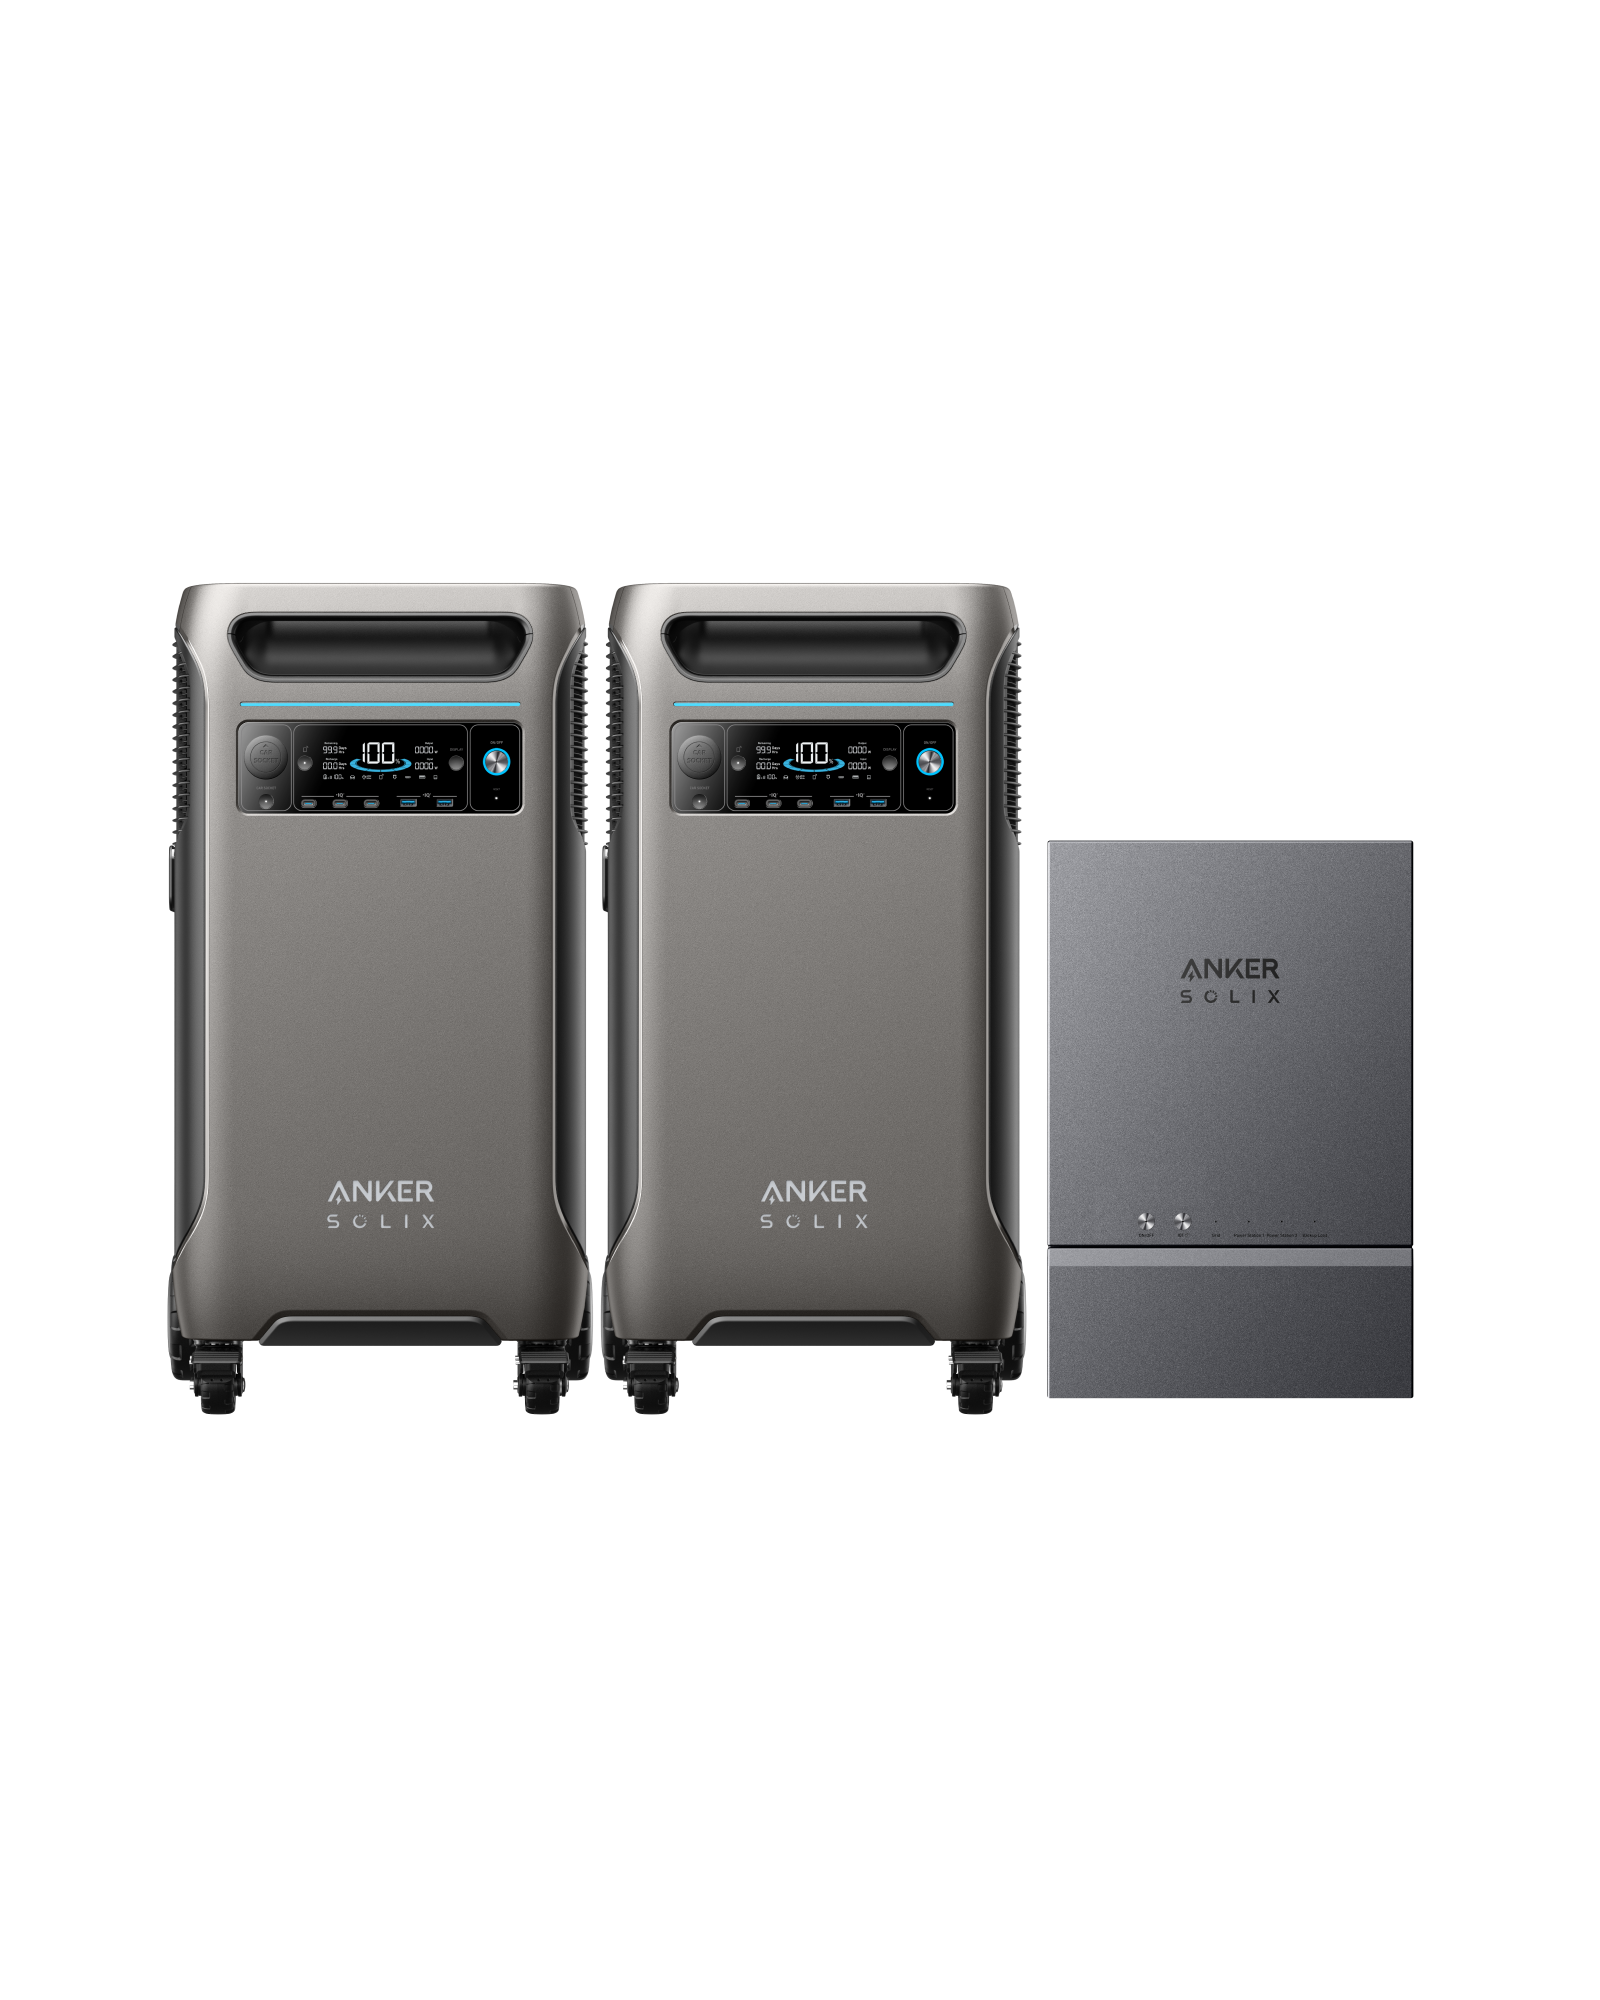 2× Anker SOLIX F3800 (12kW | 7.68kWh) + Smart Home Power Kit $6499